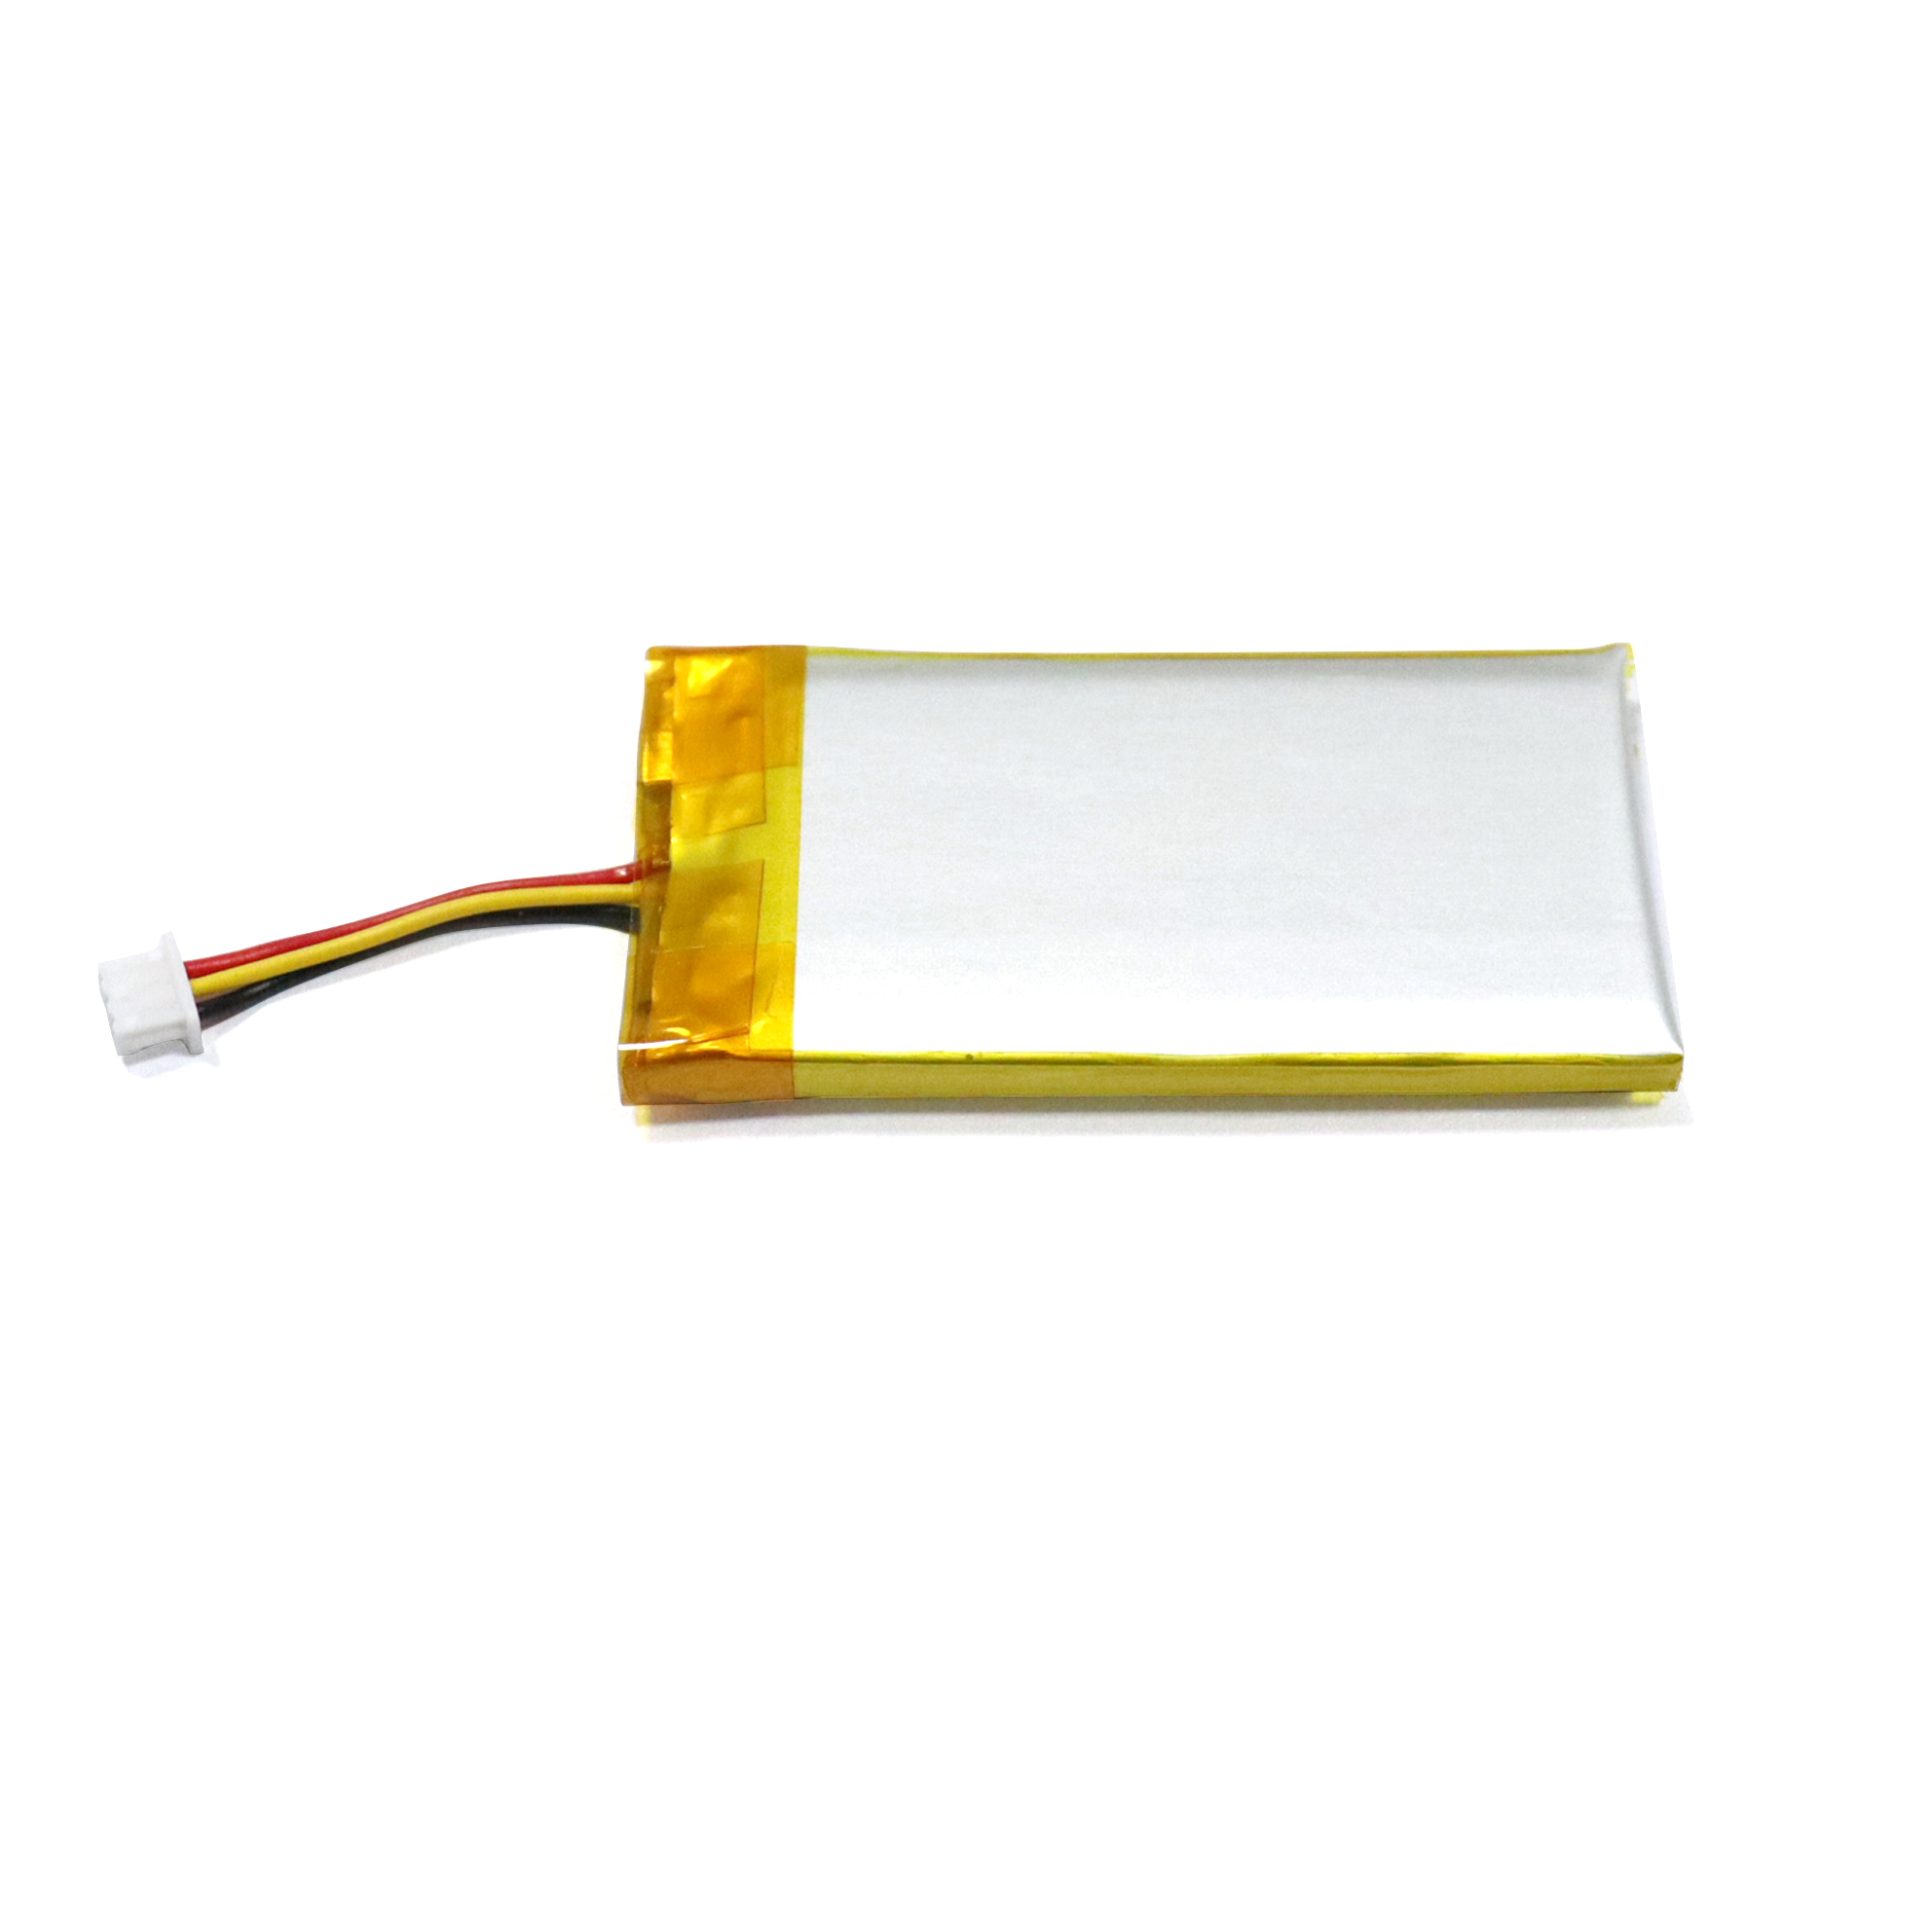 Lithium Polymer Battery 3.7V 600mAh for Bluetooth Device 